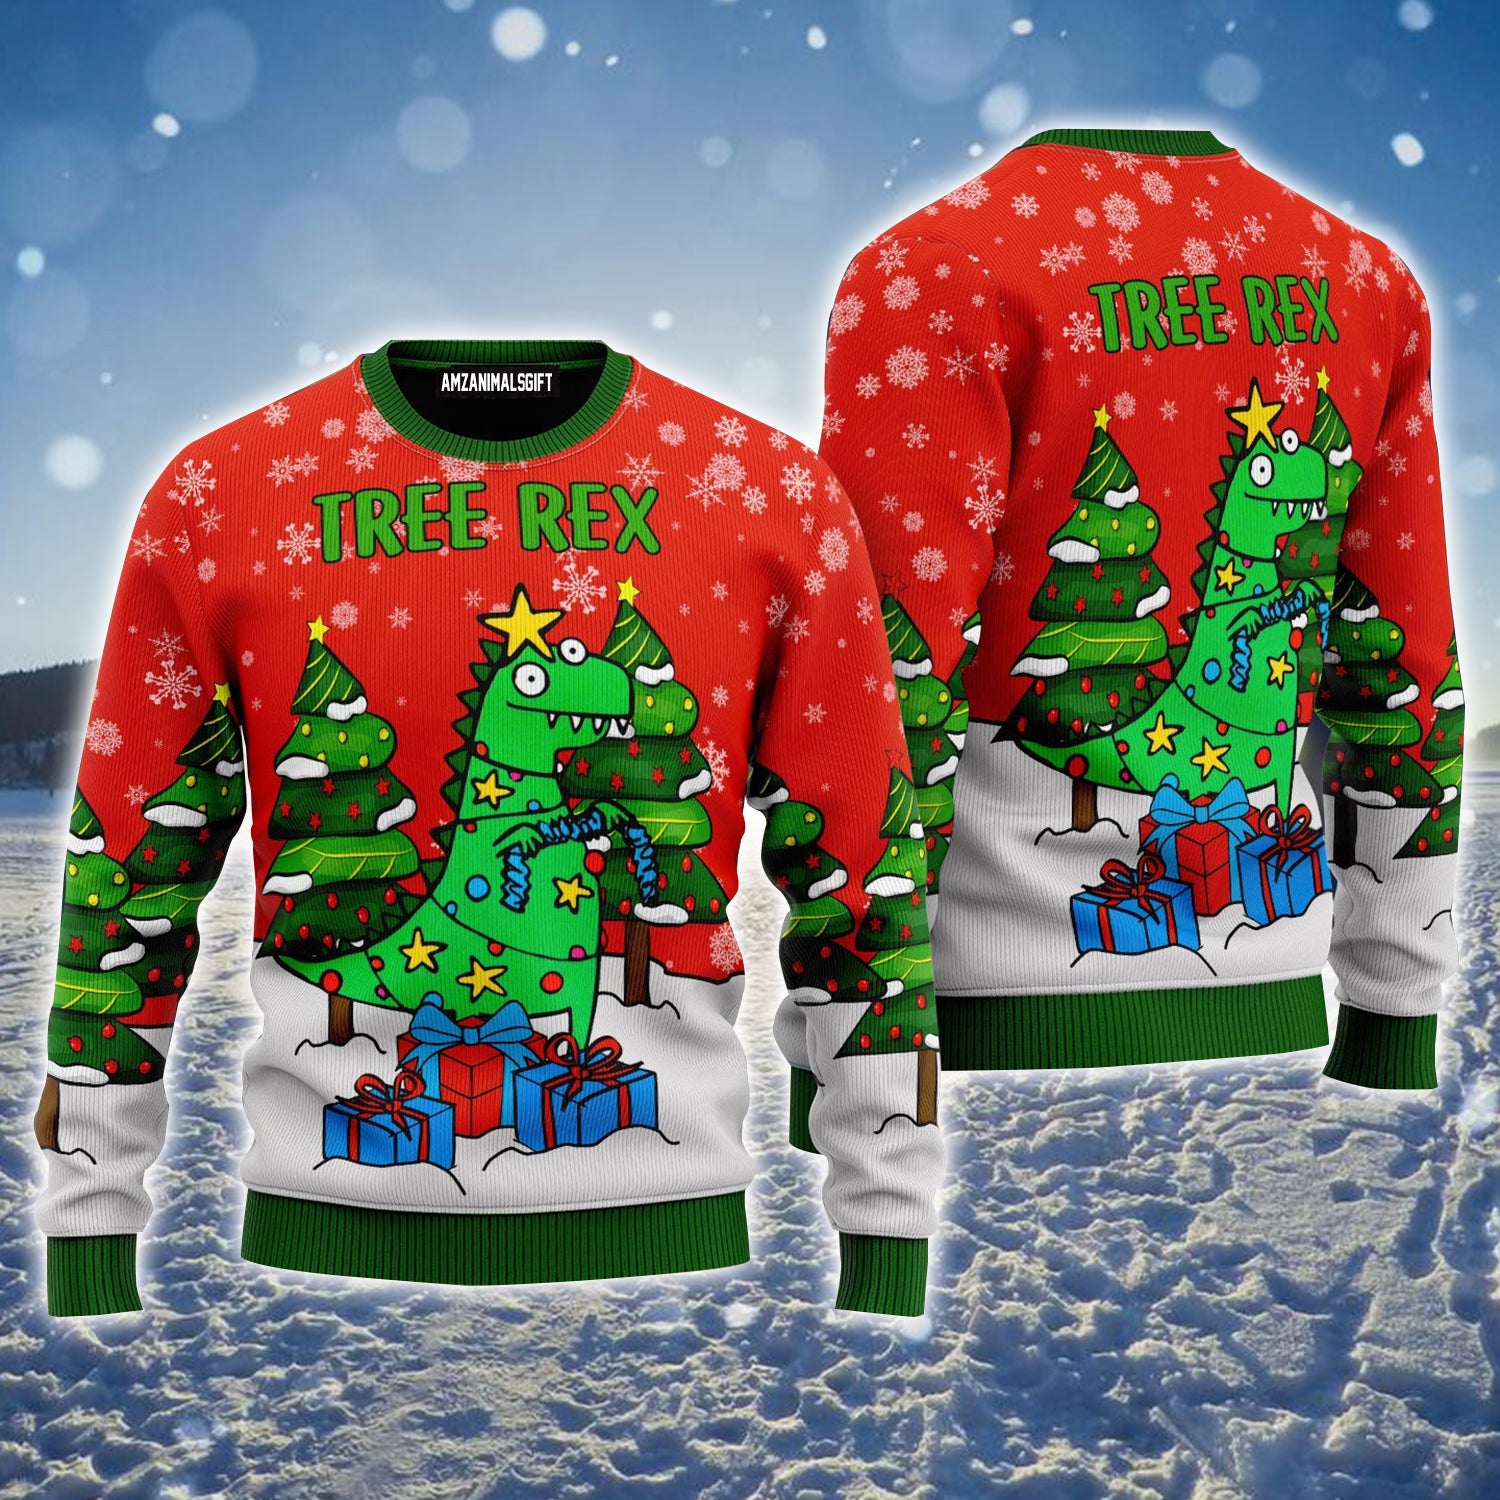 Tree Rex Ugly Christmas Sweater, Funny Christmas Pattern Ugly Sweater For Men & Women - Perfect Gift For Christmas, Friends, Family